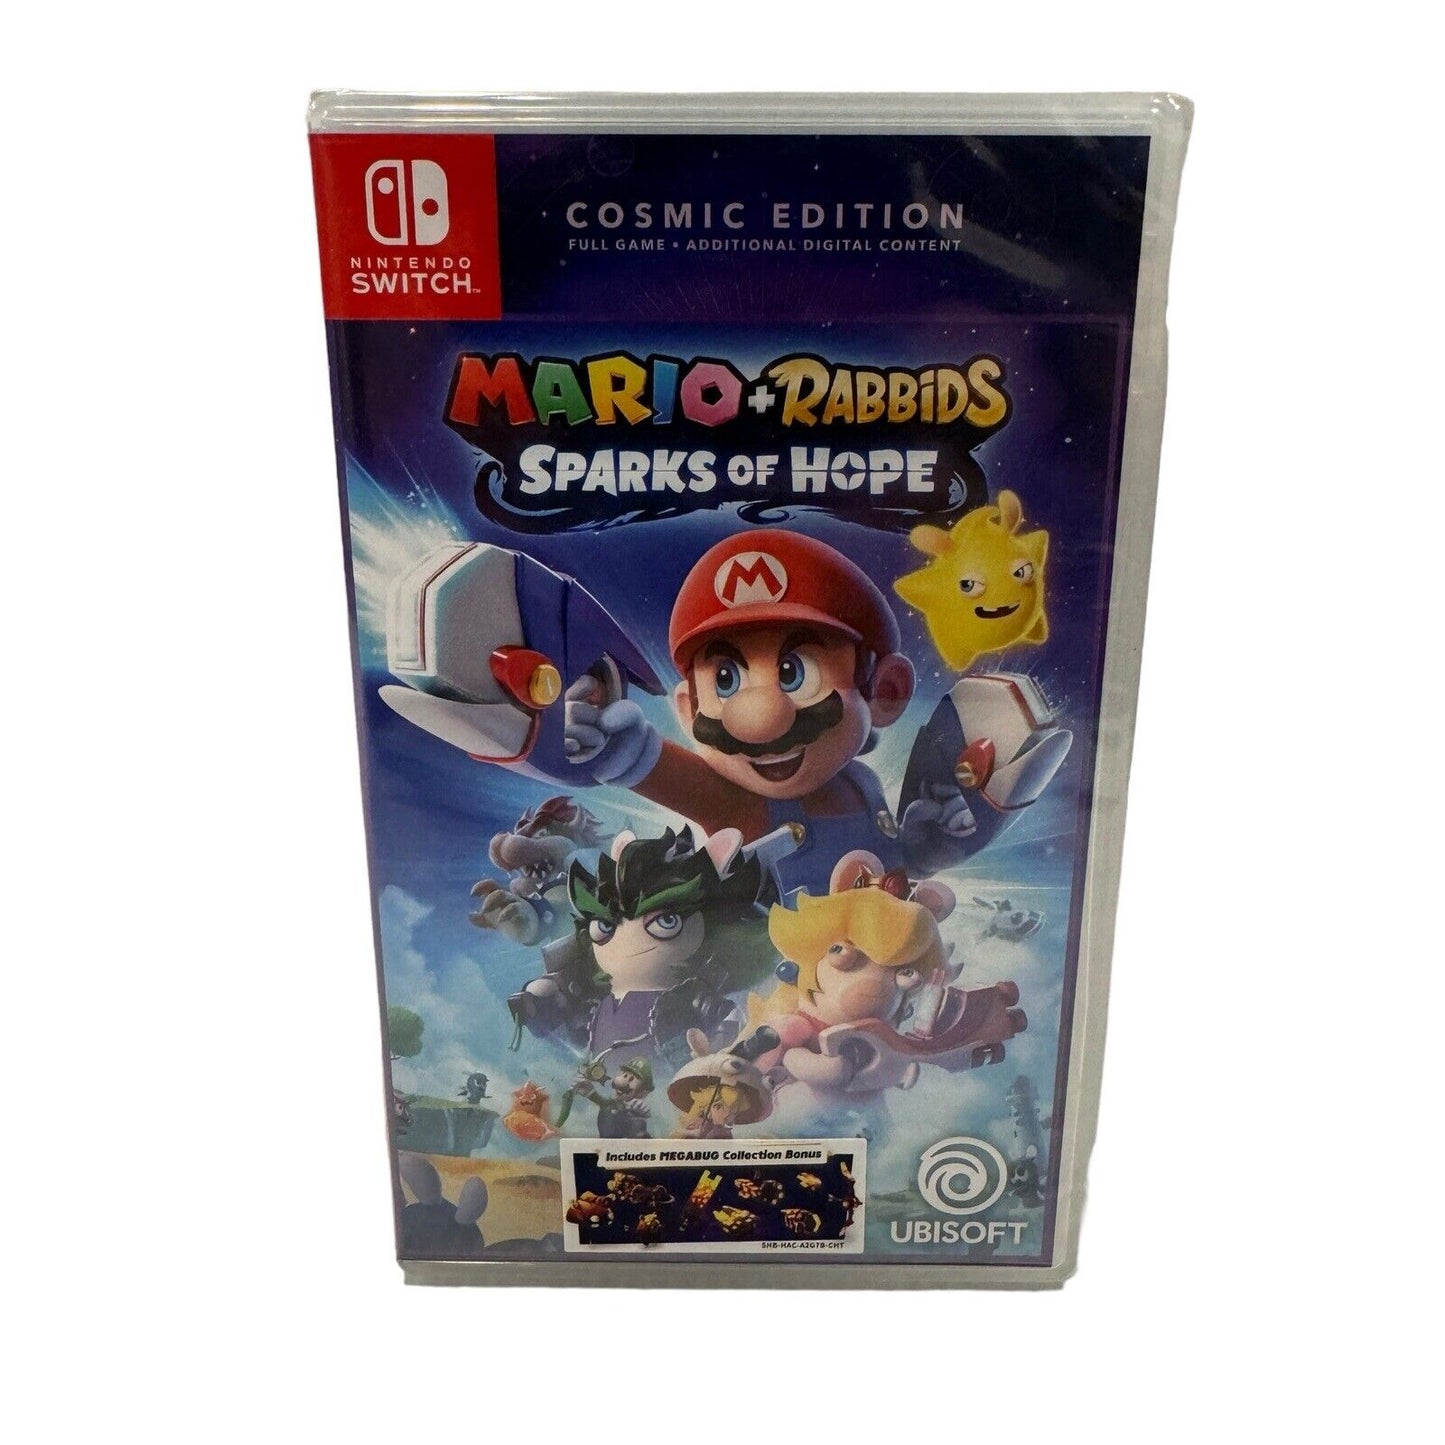 Mario Rabbids Sparks of Hope Nintendo Switch - Sealed Cosmic Edition